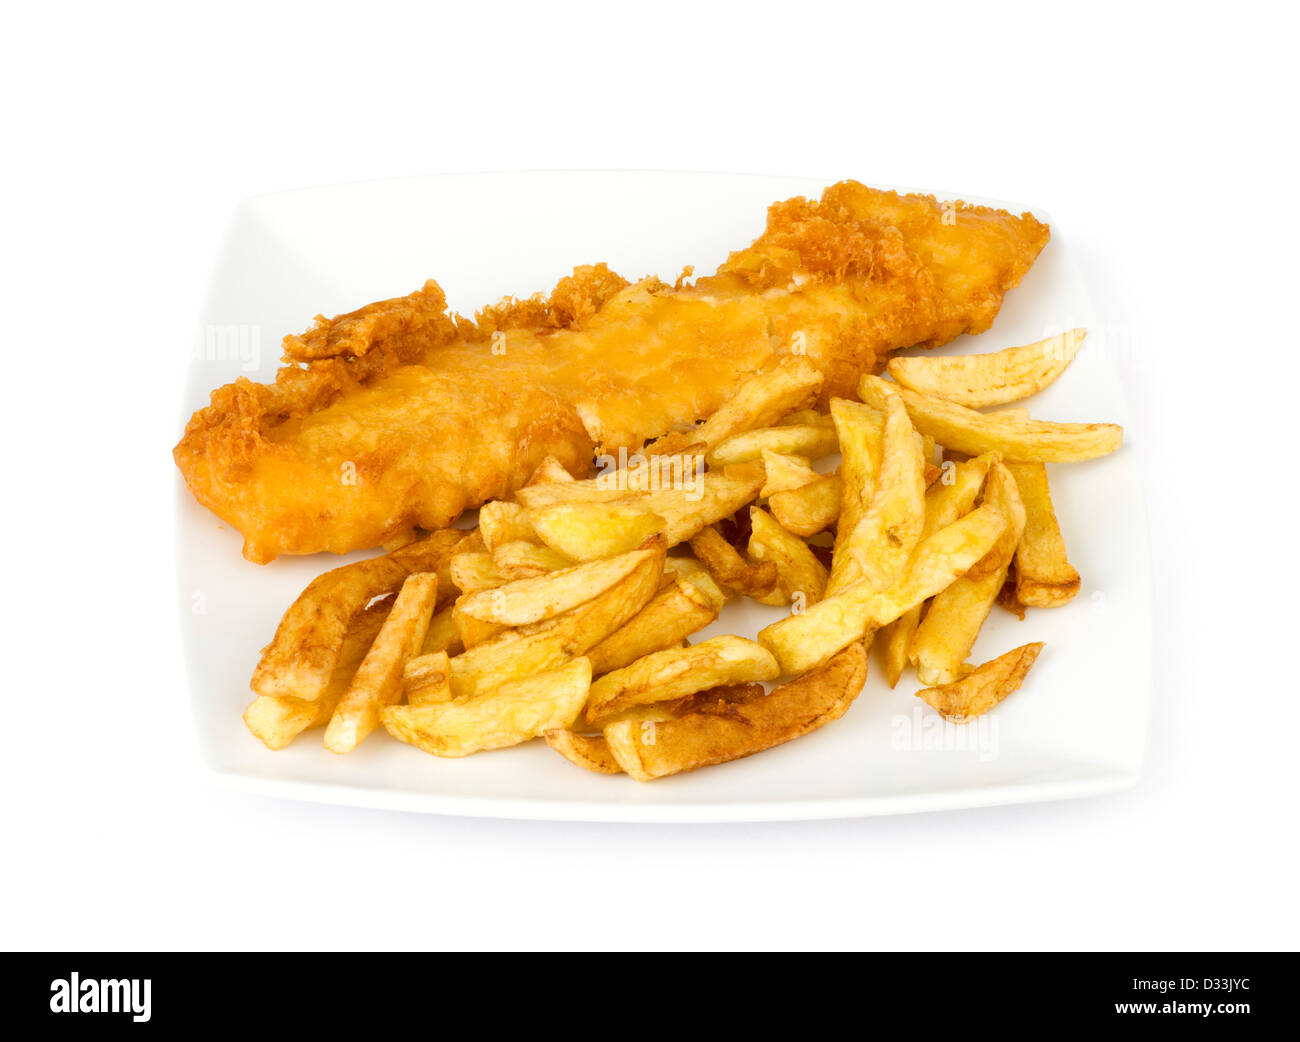 Teller mit traditionellen Take-away-Fish And chips Stockfoto